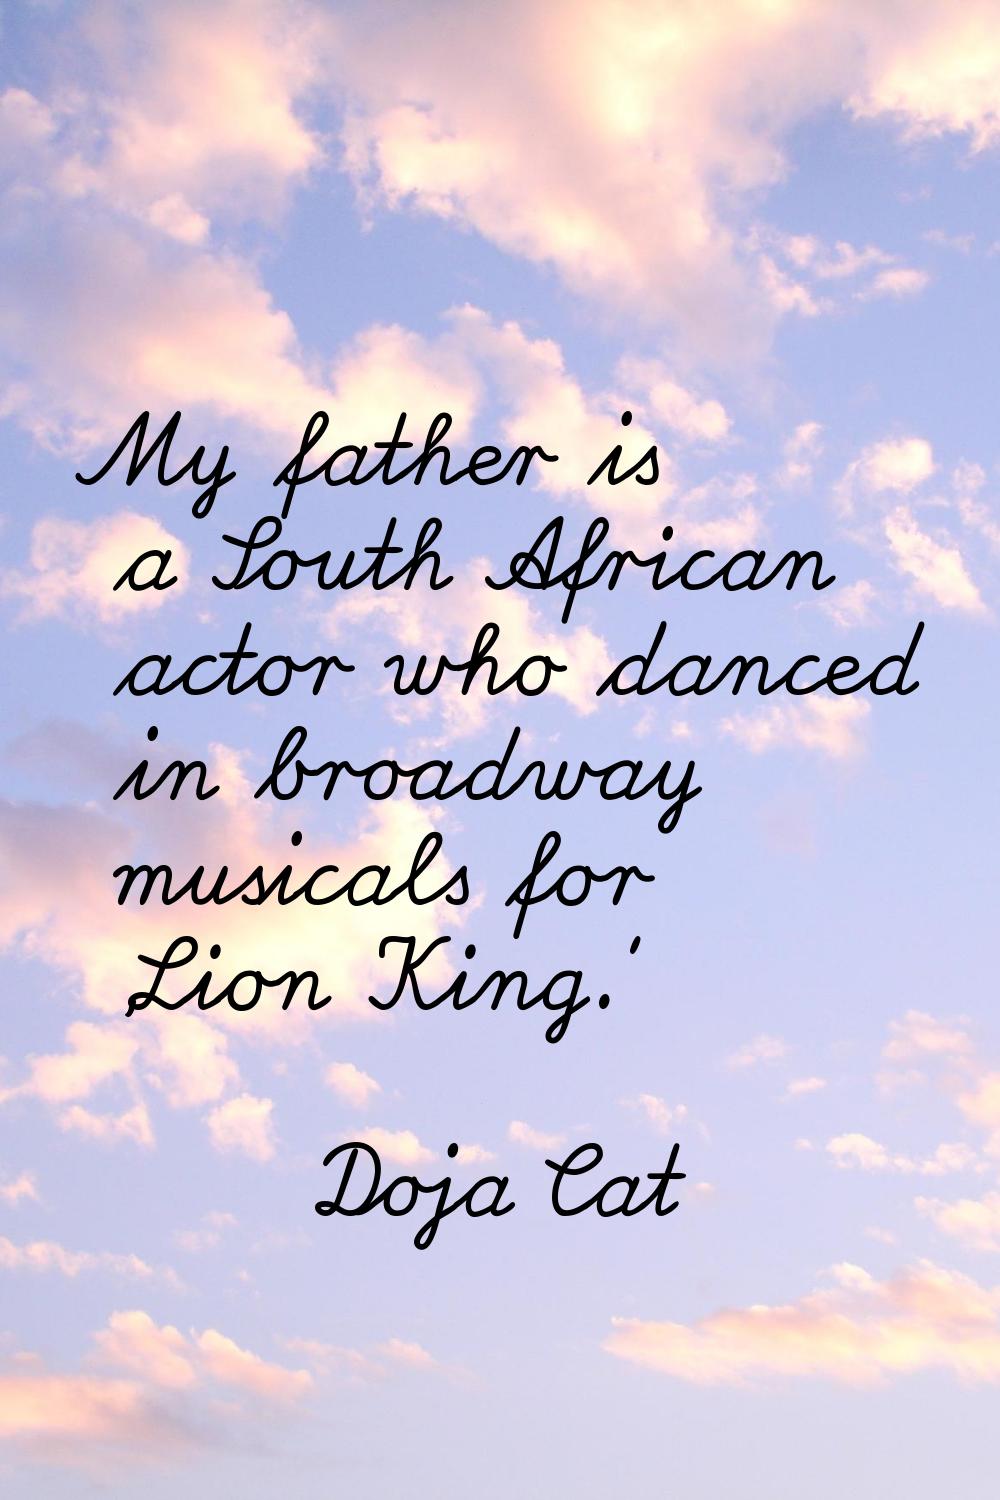 My father is a South African actor who danced in broadway musicals for 'Lion King.'